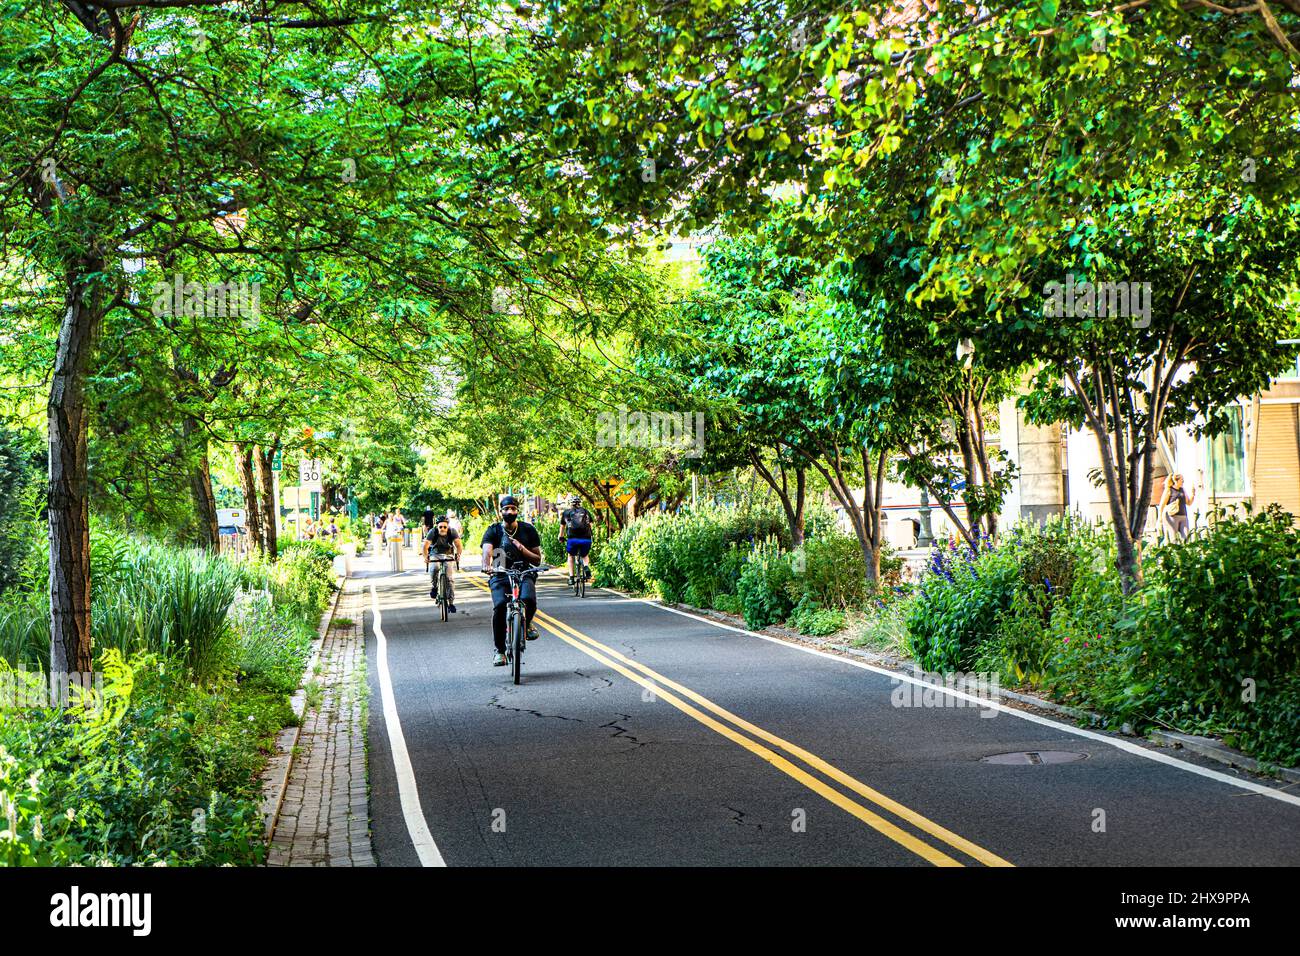 West Side Bicycle Lanes, New York City, New York, États-Unis Banque D'Images